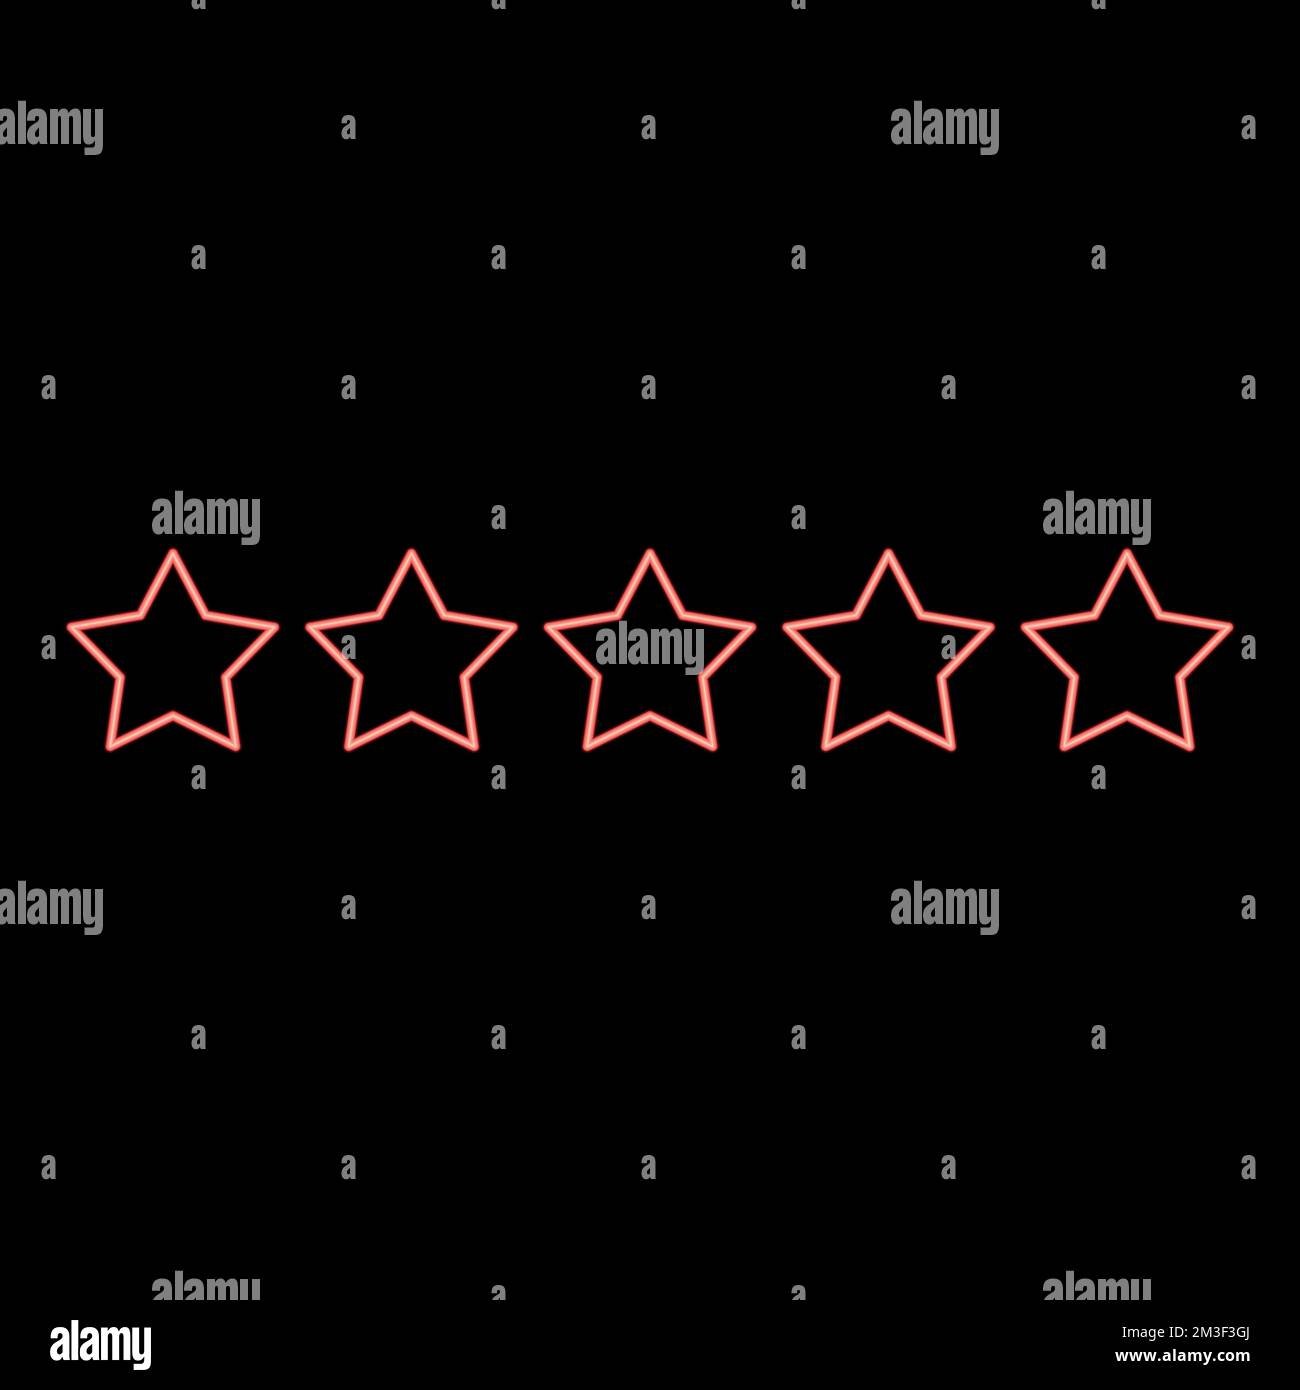 Neon five stars 5 stars red color vector illustration image flat style light Stock Vector